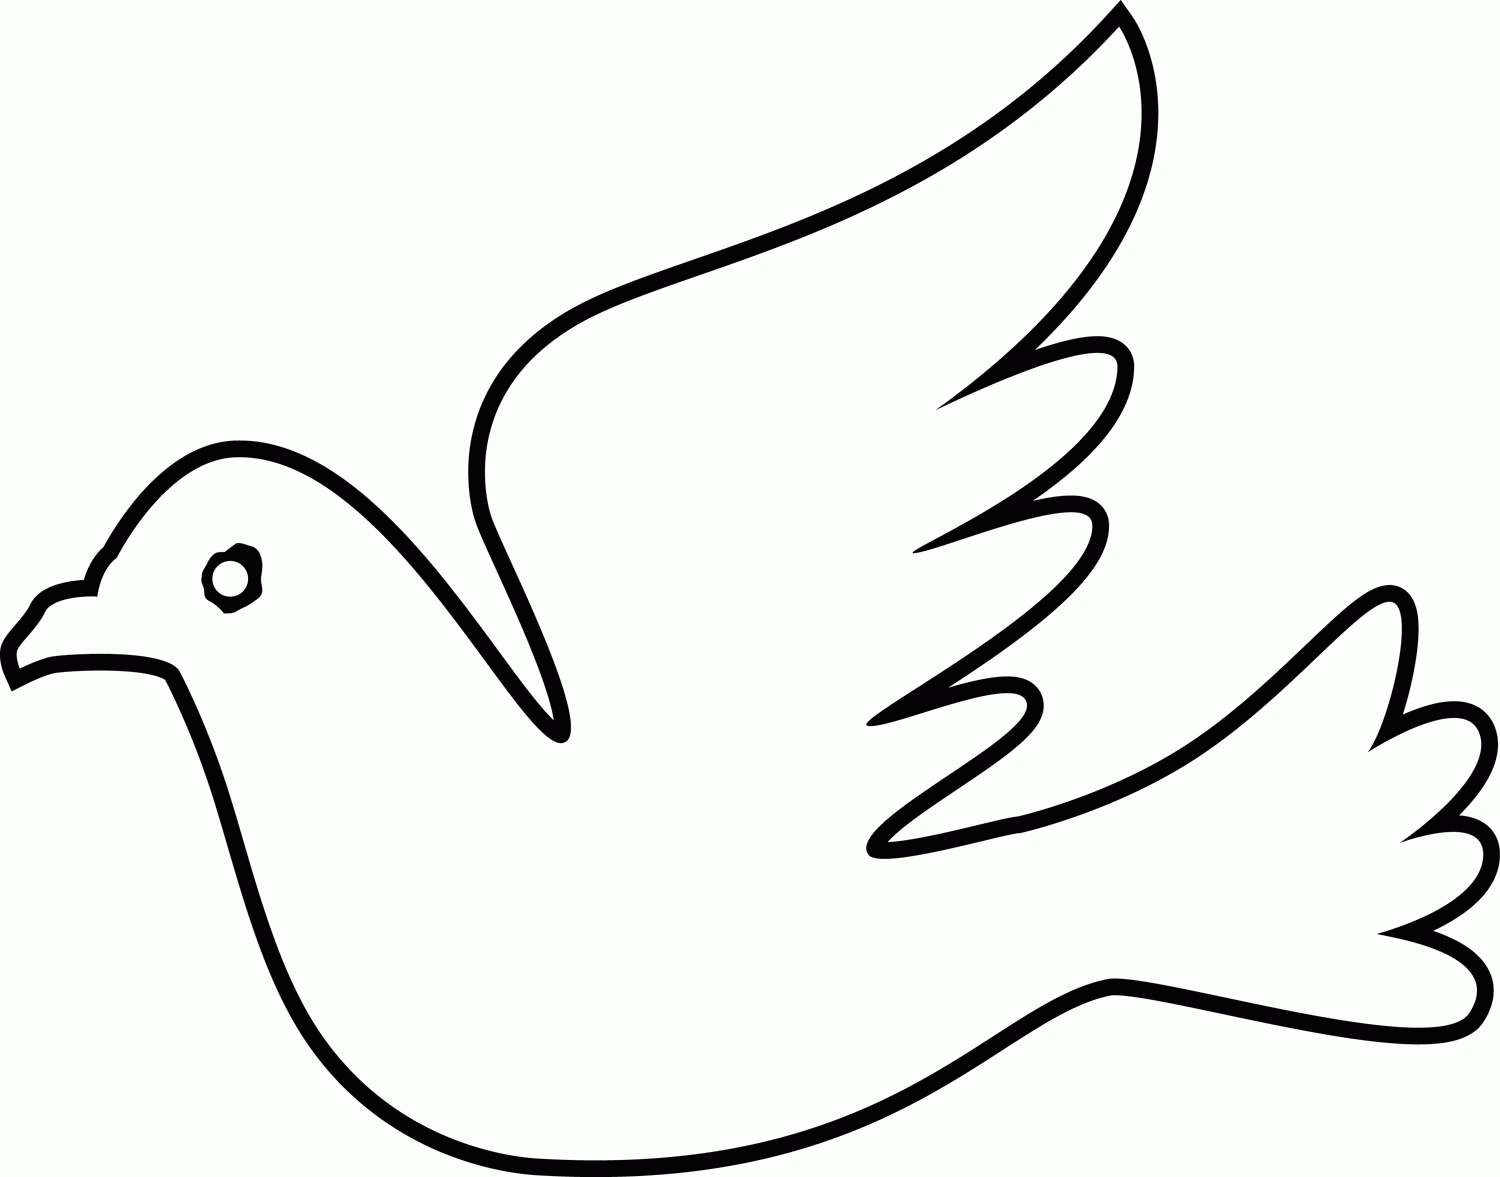 Free white dove coloring. Doves clipart printable